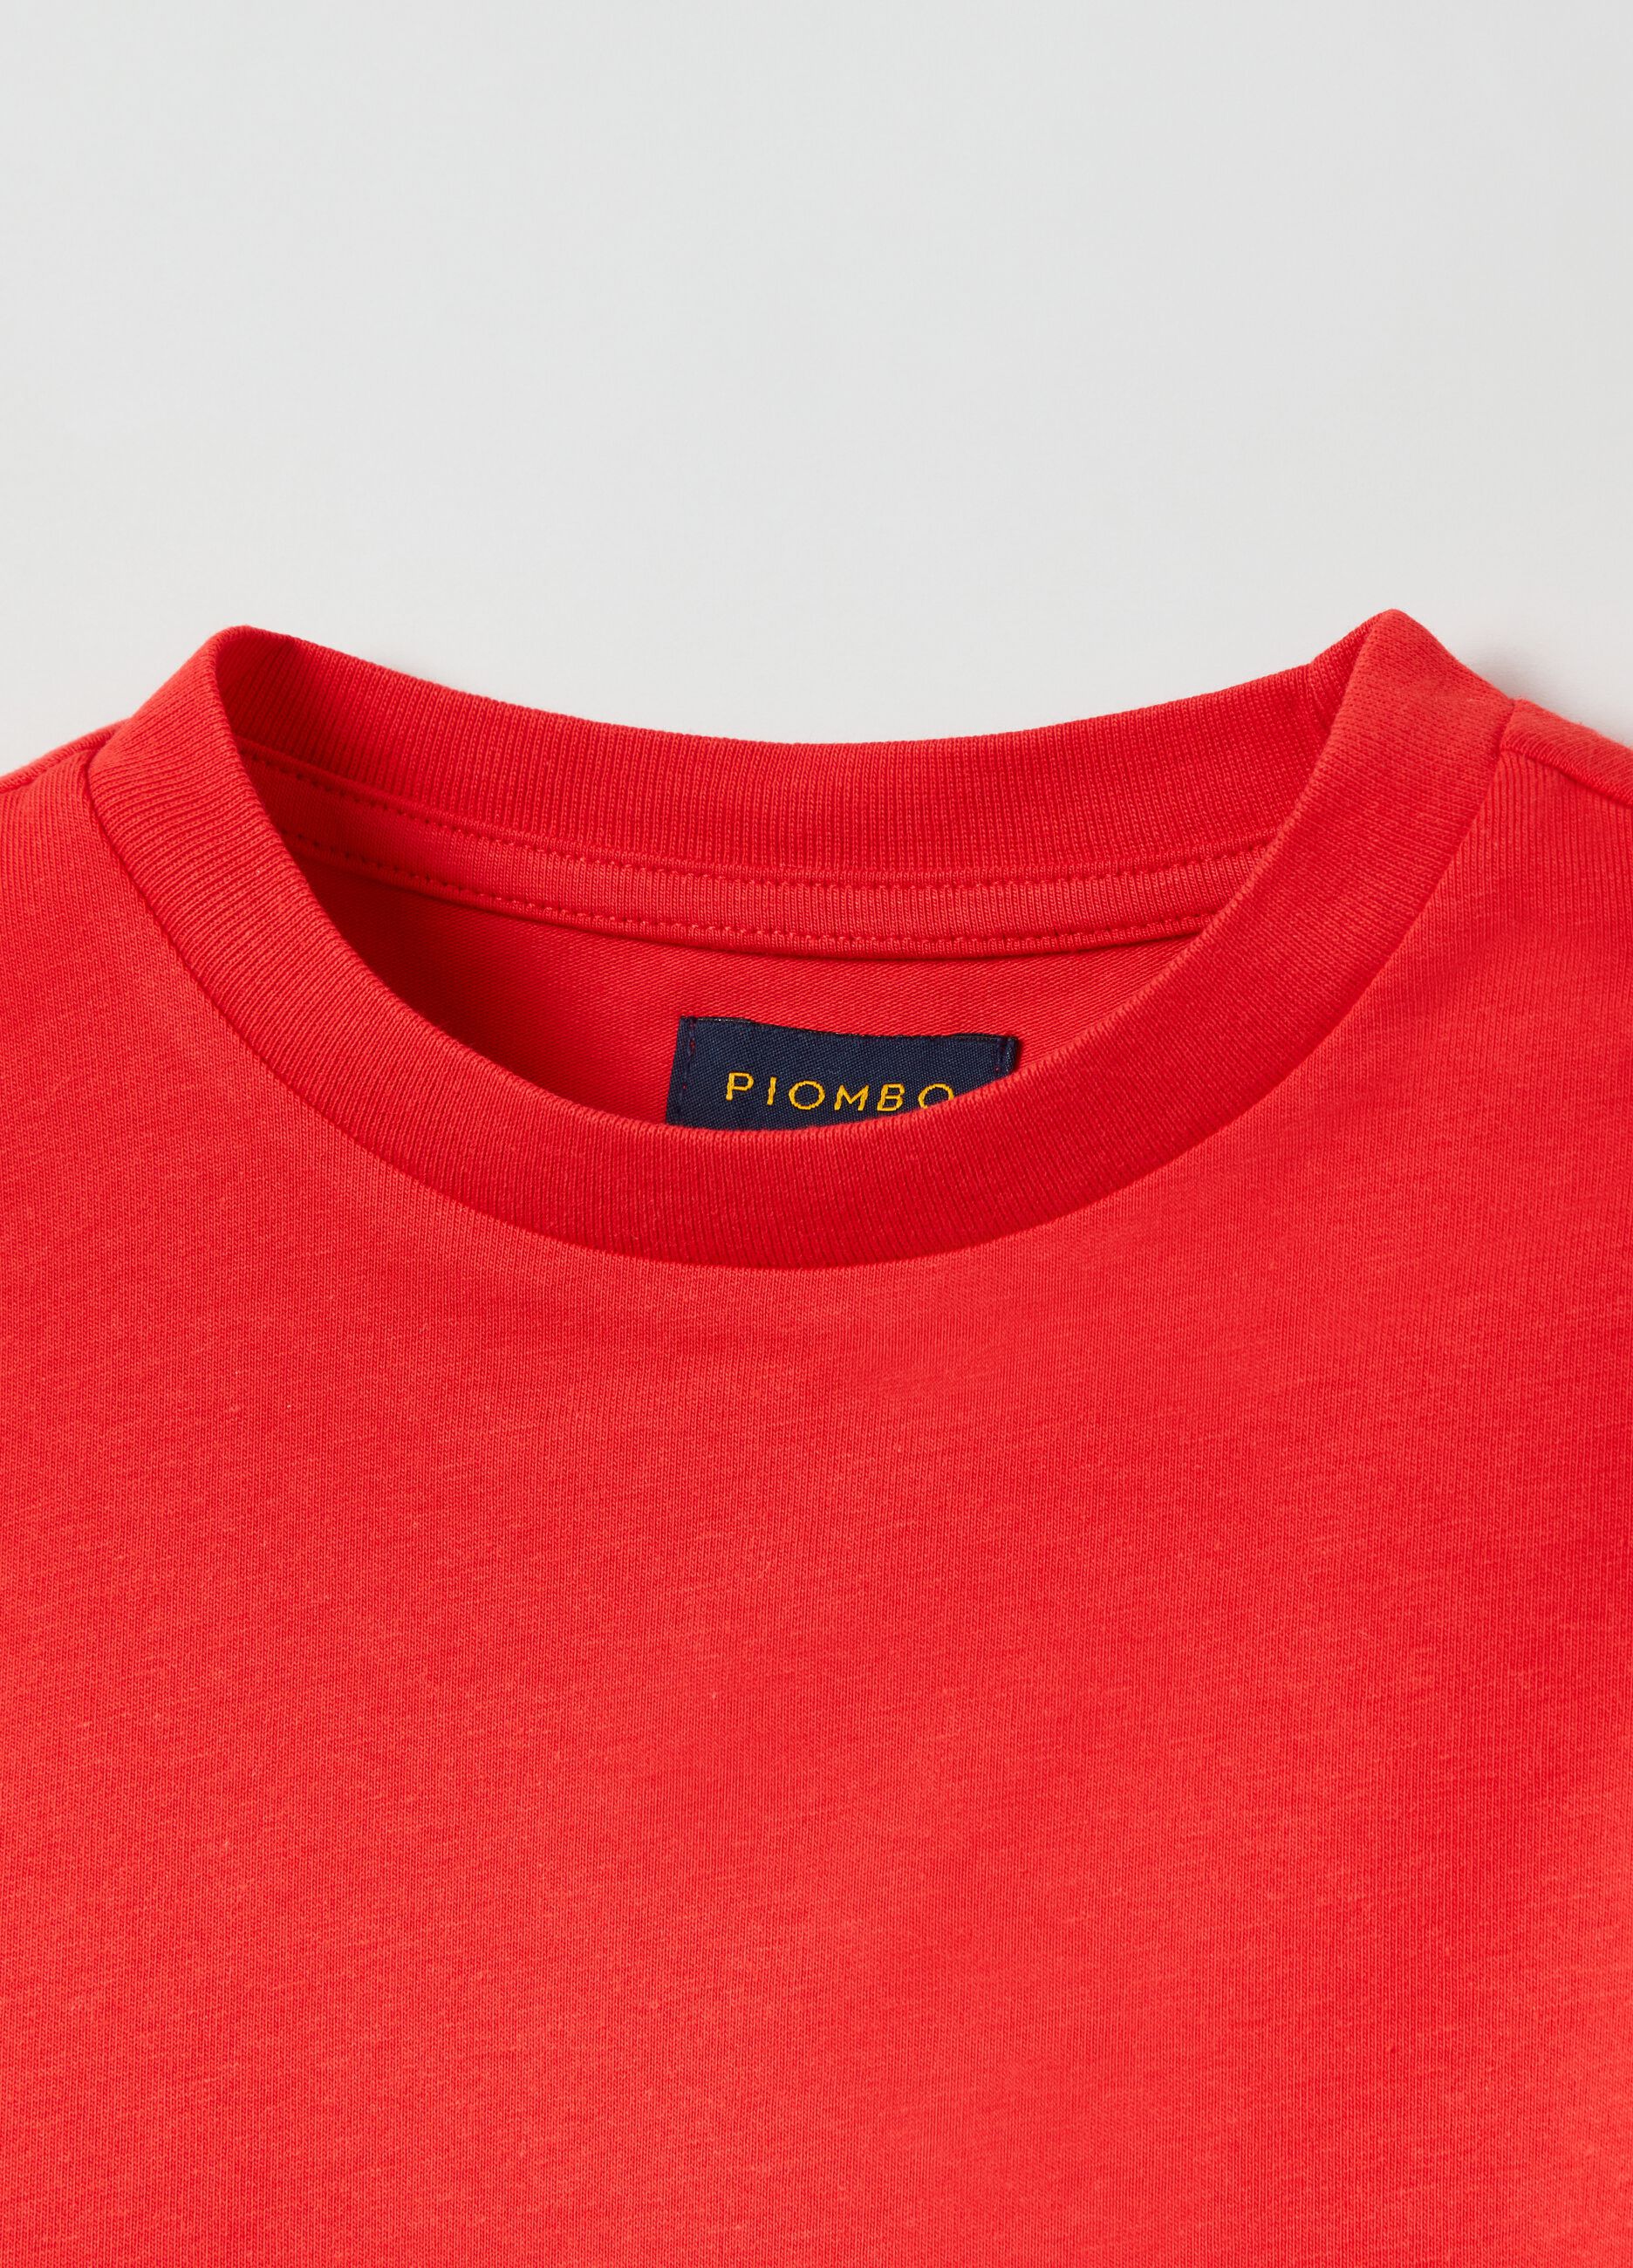 Solid colour T-shirt with round neck